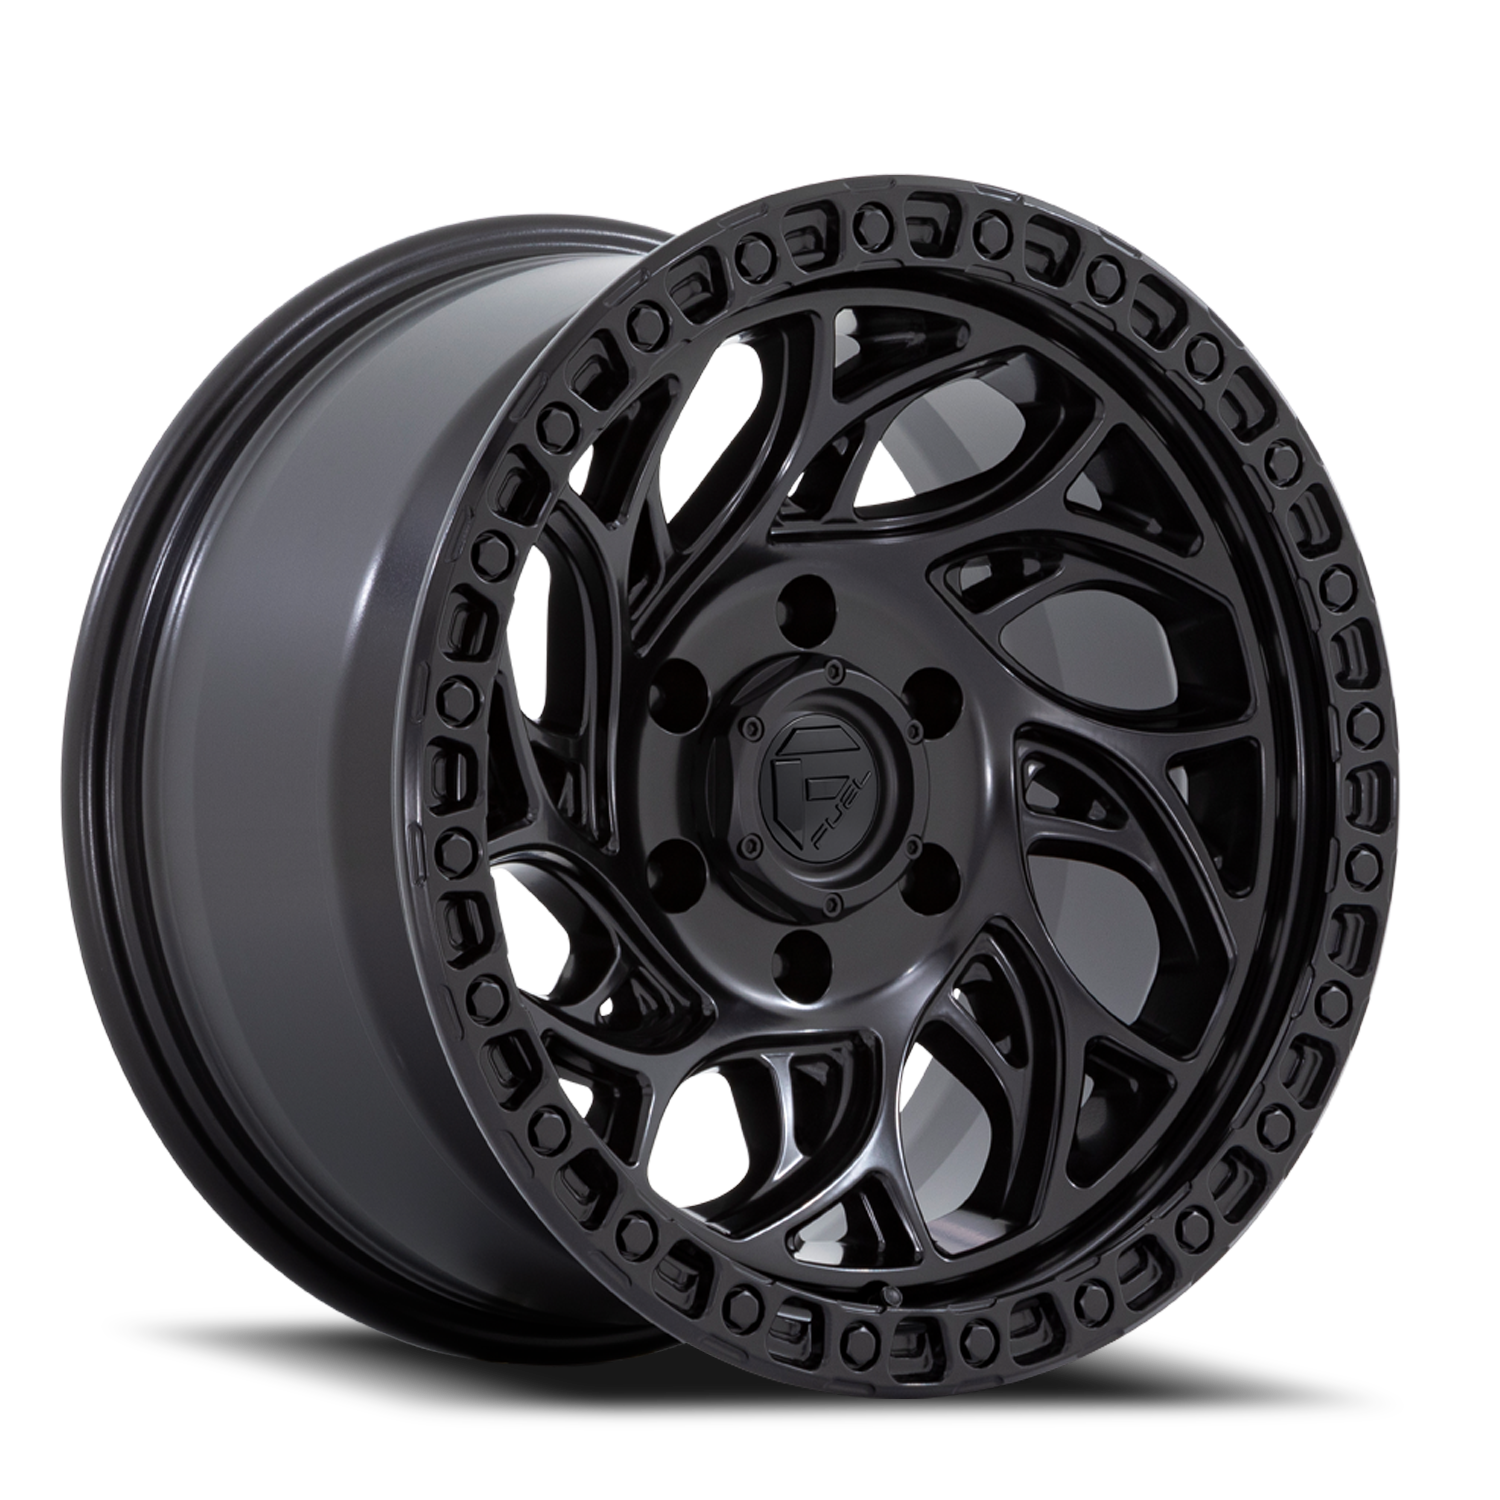 Aluminum Wheels 17X9 Runner OR D852 5 On 150 Blackout 110.1 Bore 1 Offset Fuel Off Road Wheels